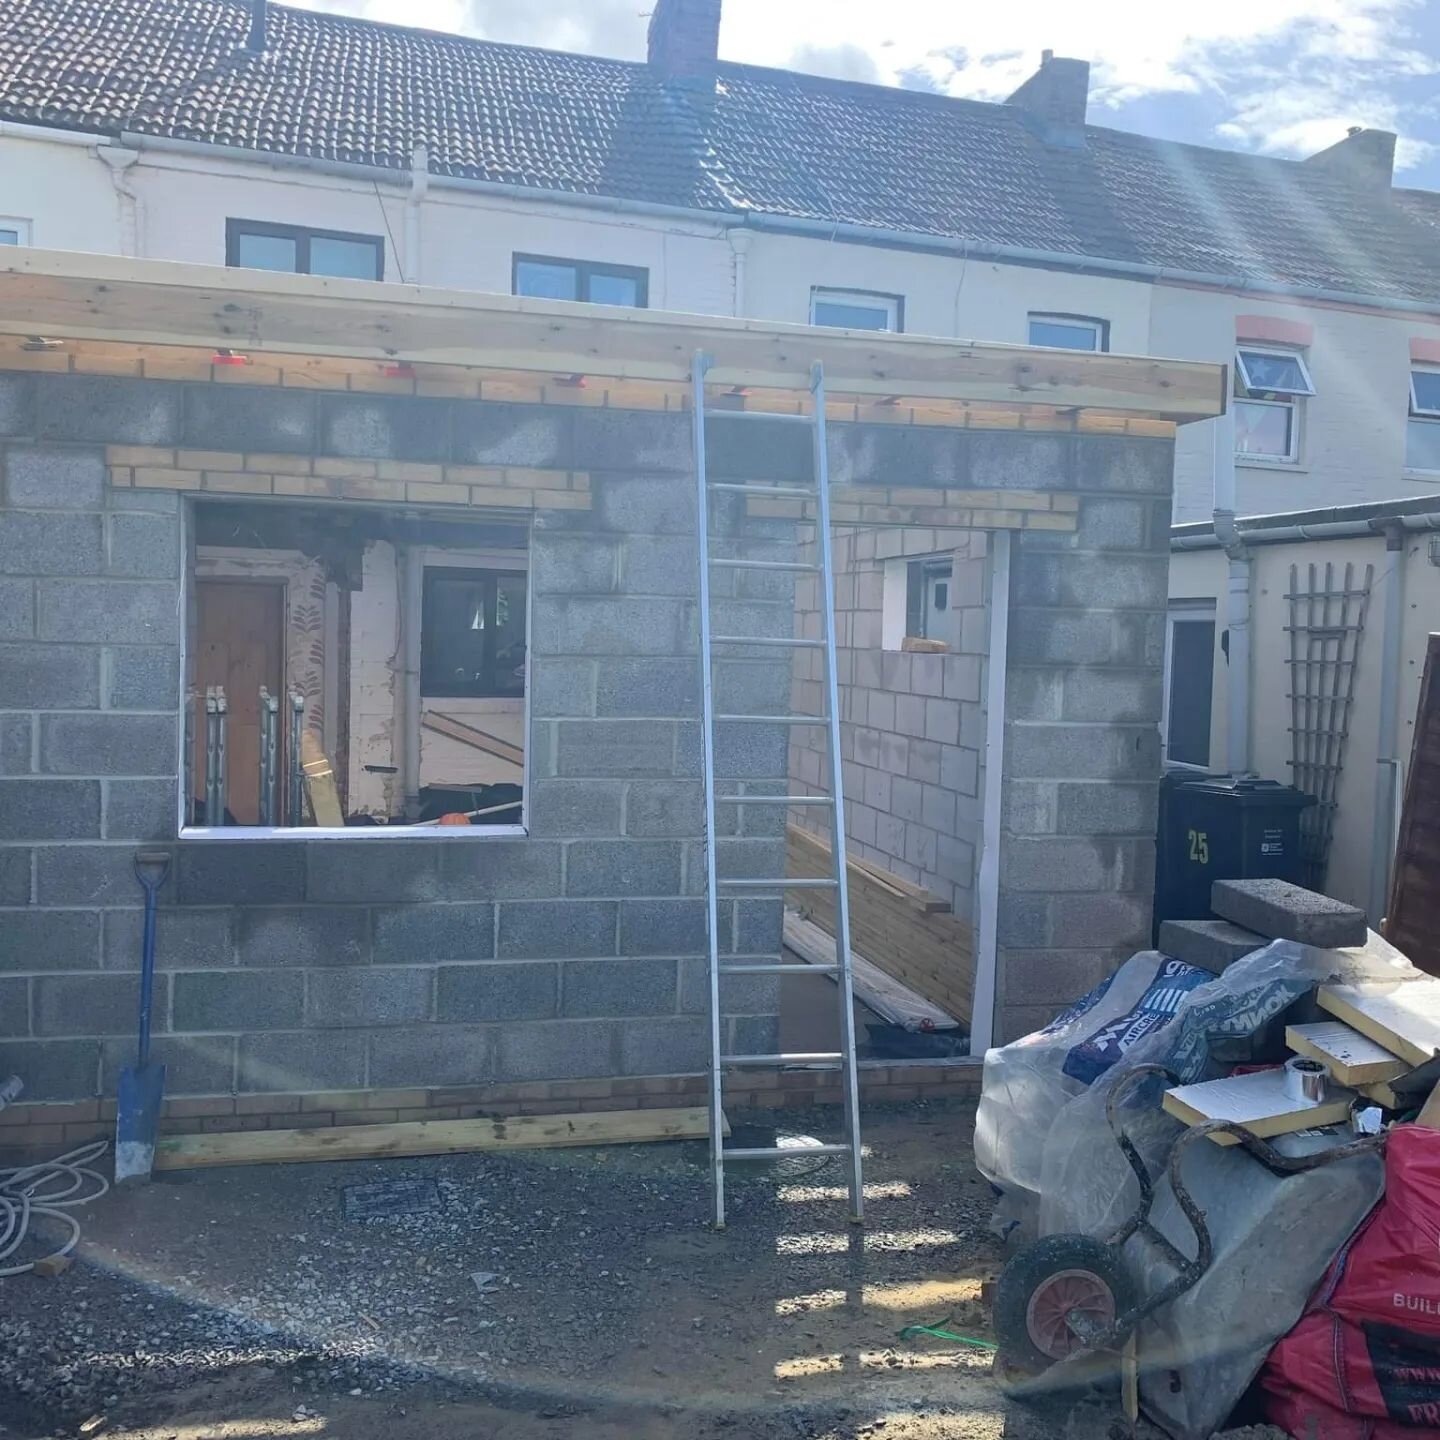 🟠 Update on Bridgwater Extension 🟠

A quick update on our extension project in Bridgwater 👍🏻

The roof construction is well underway and should be completed by the end of the week if the weather is kind to us 🤞⛔️🌧

We will update you again once